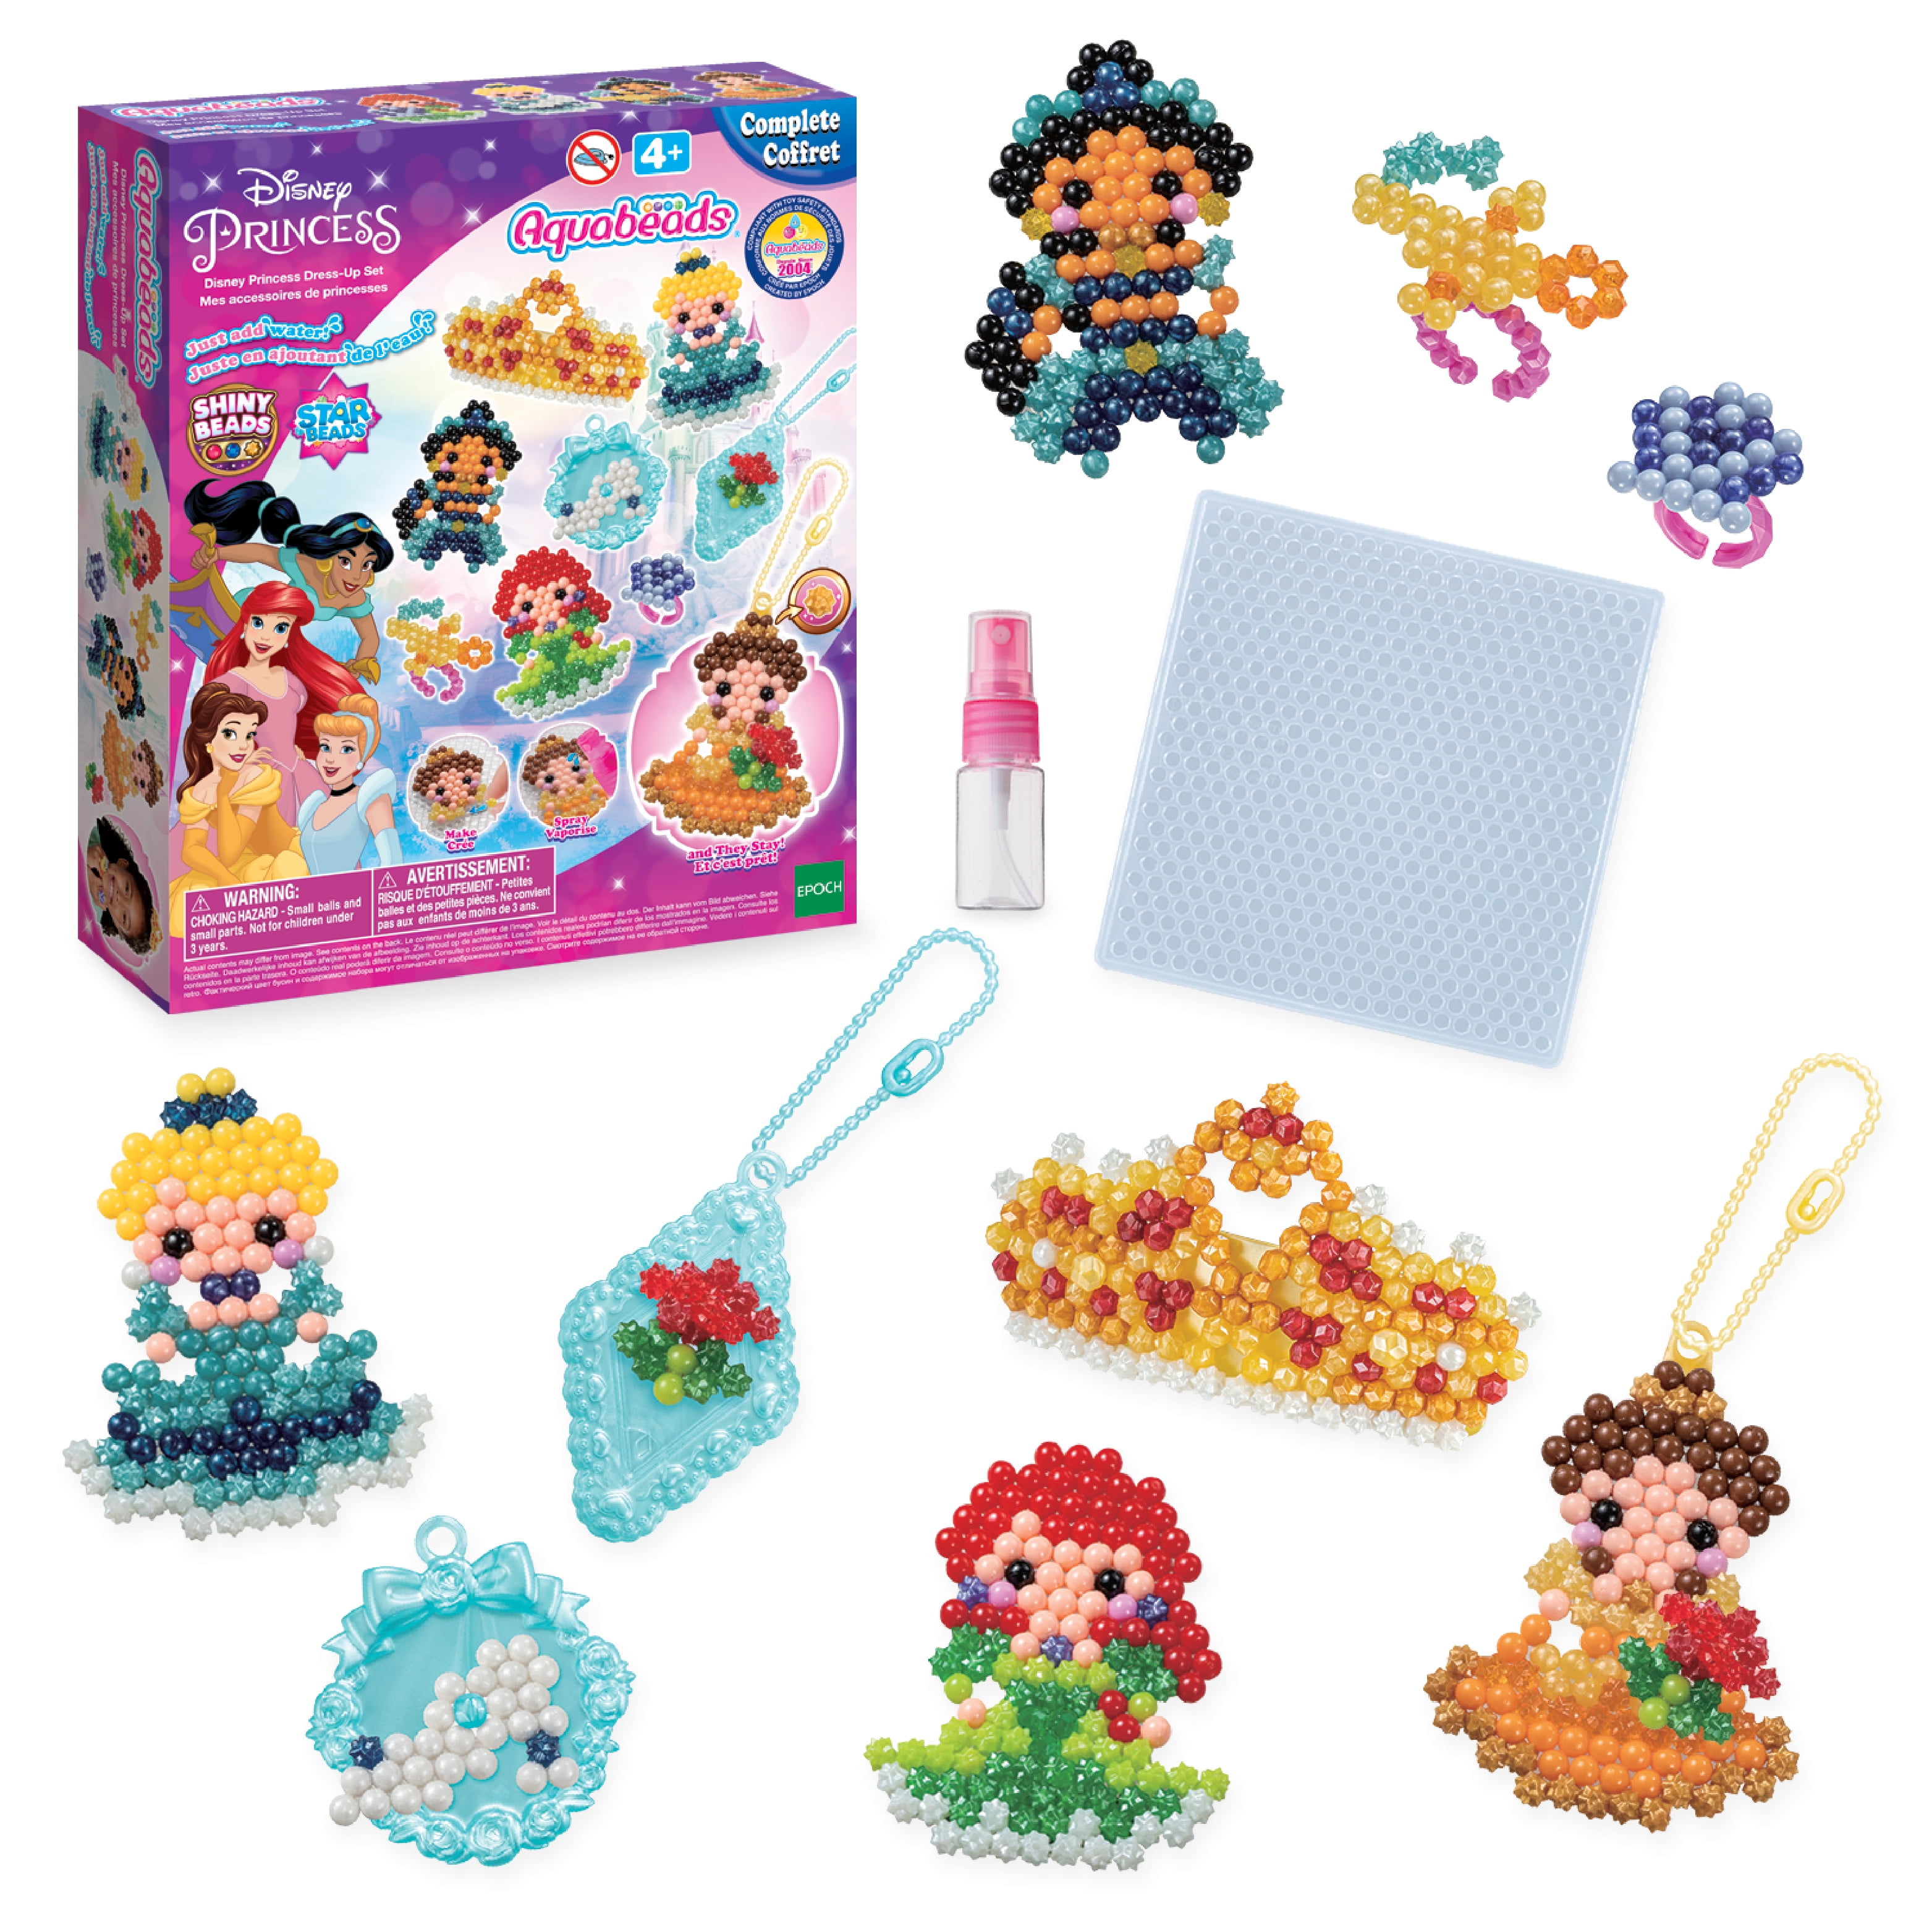 Aquabeads Charm Maker - Teaching Toys and Books